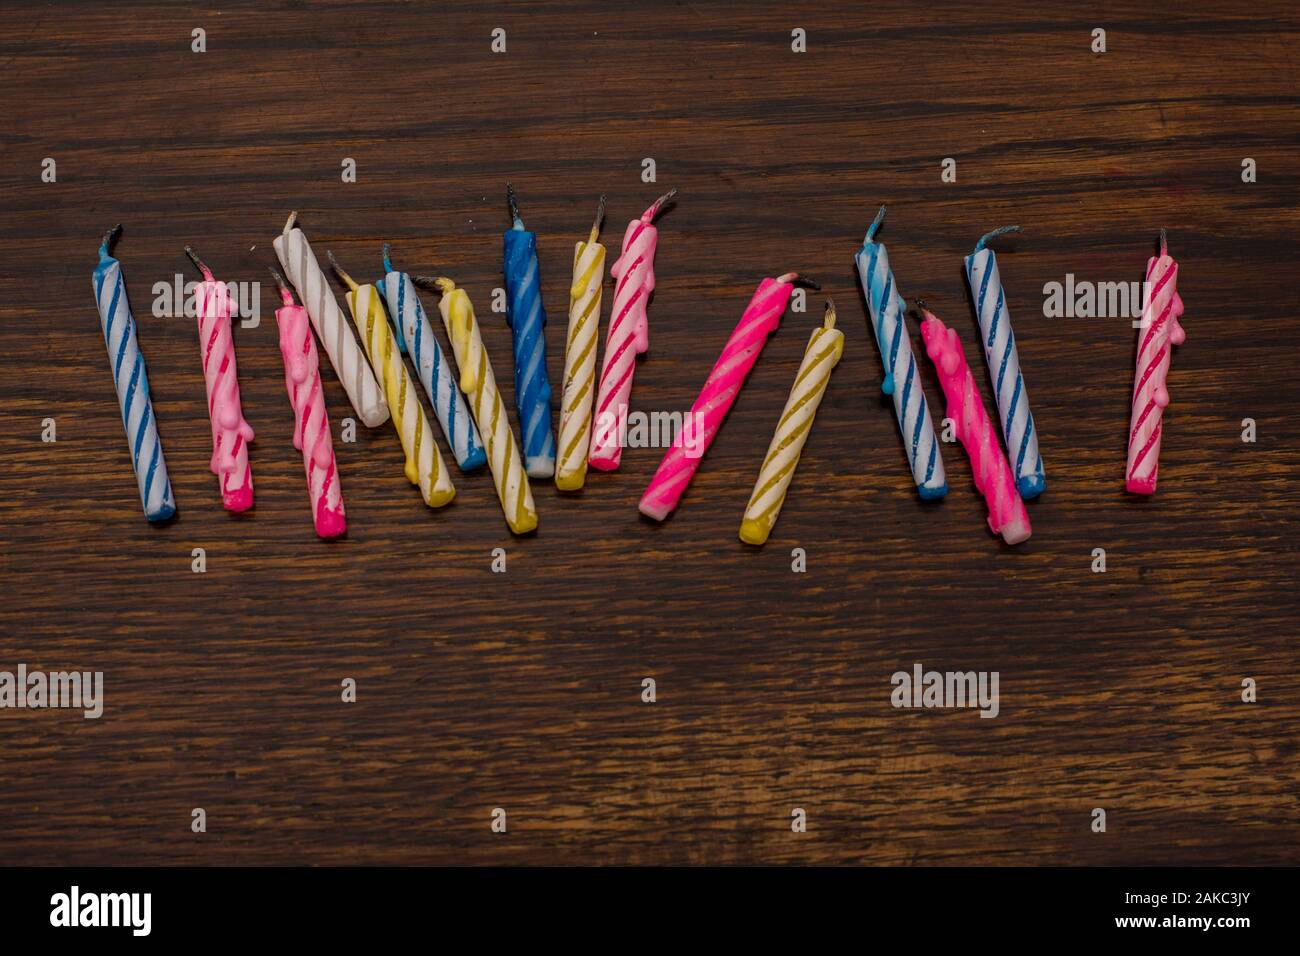 Close-up of colorful birthday cake candles on the background of an old wooden table Stock Photo